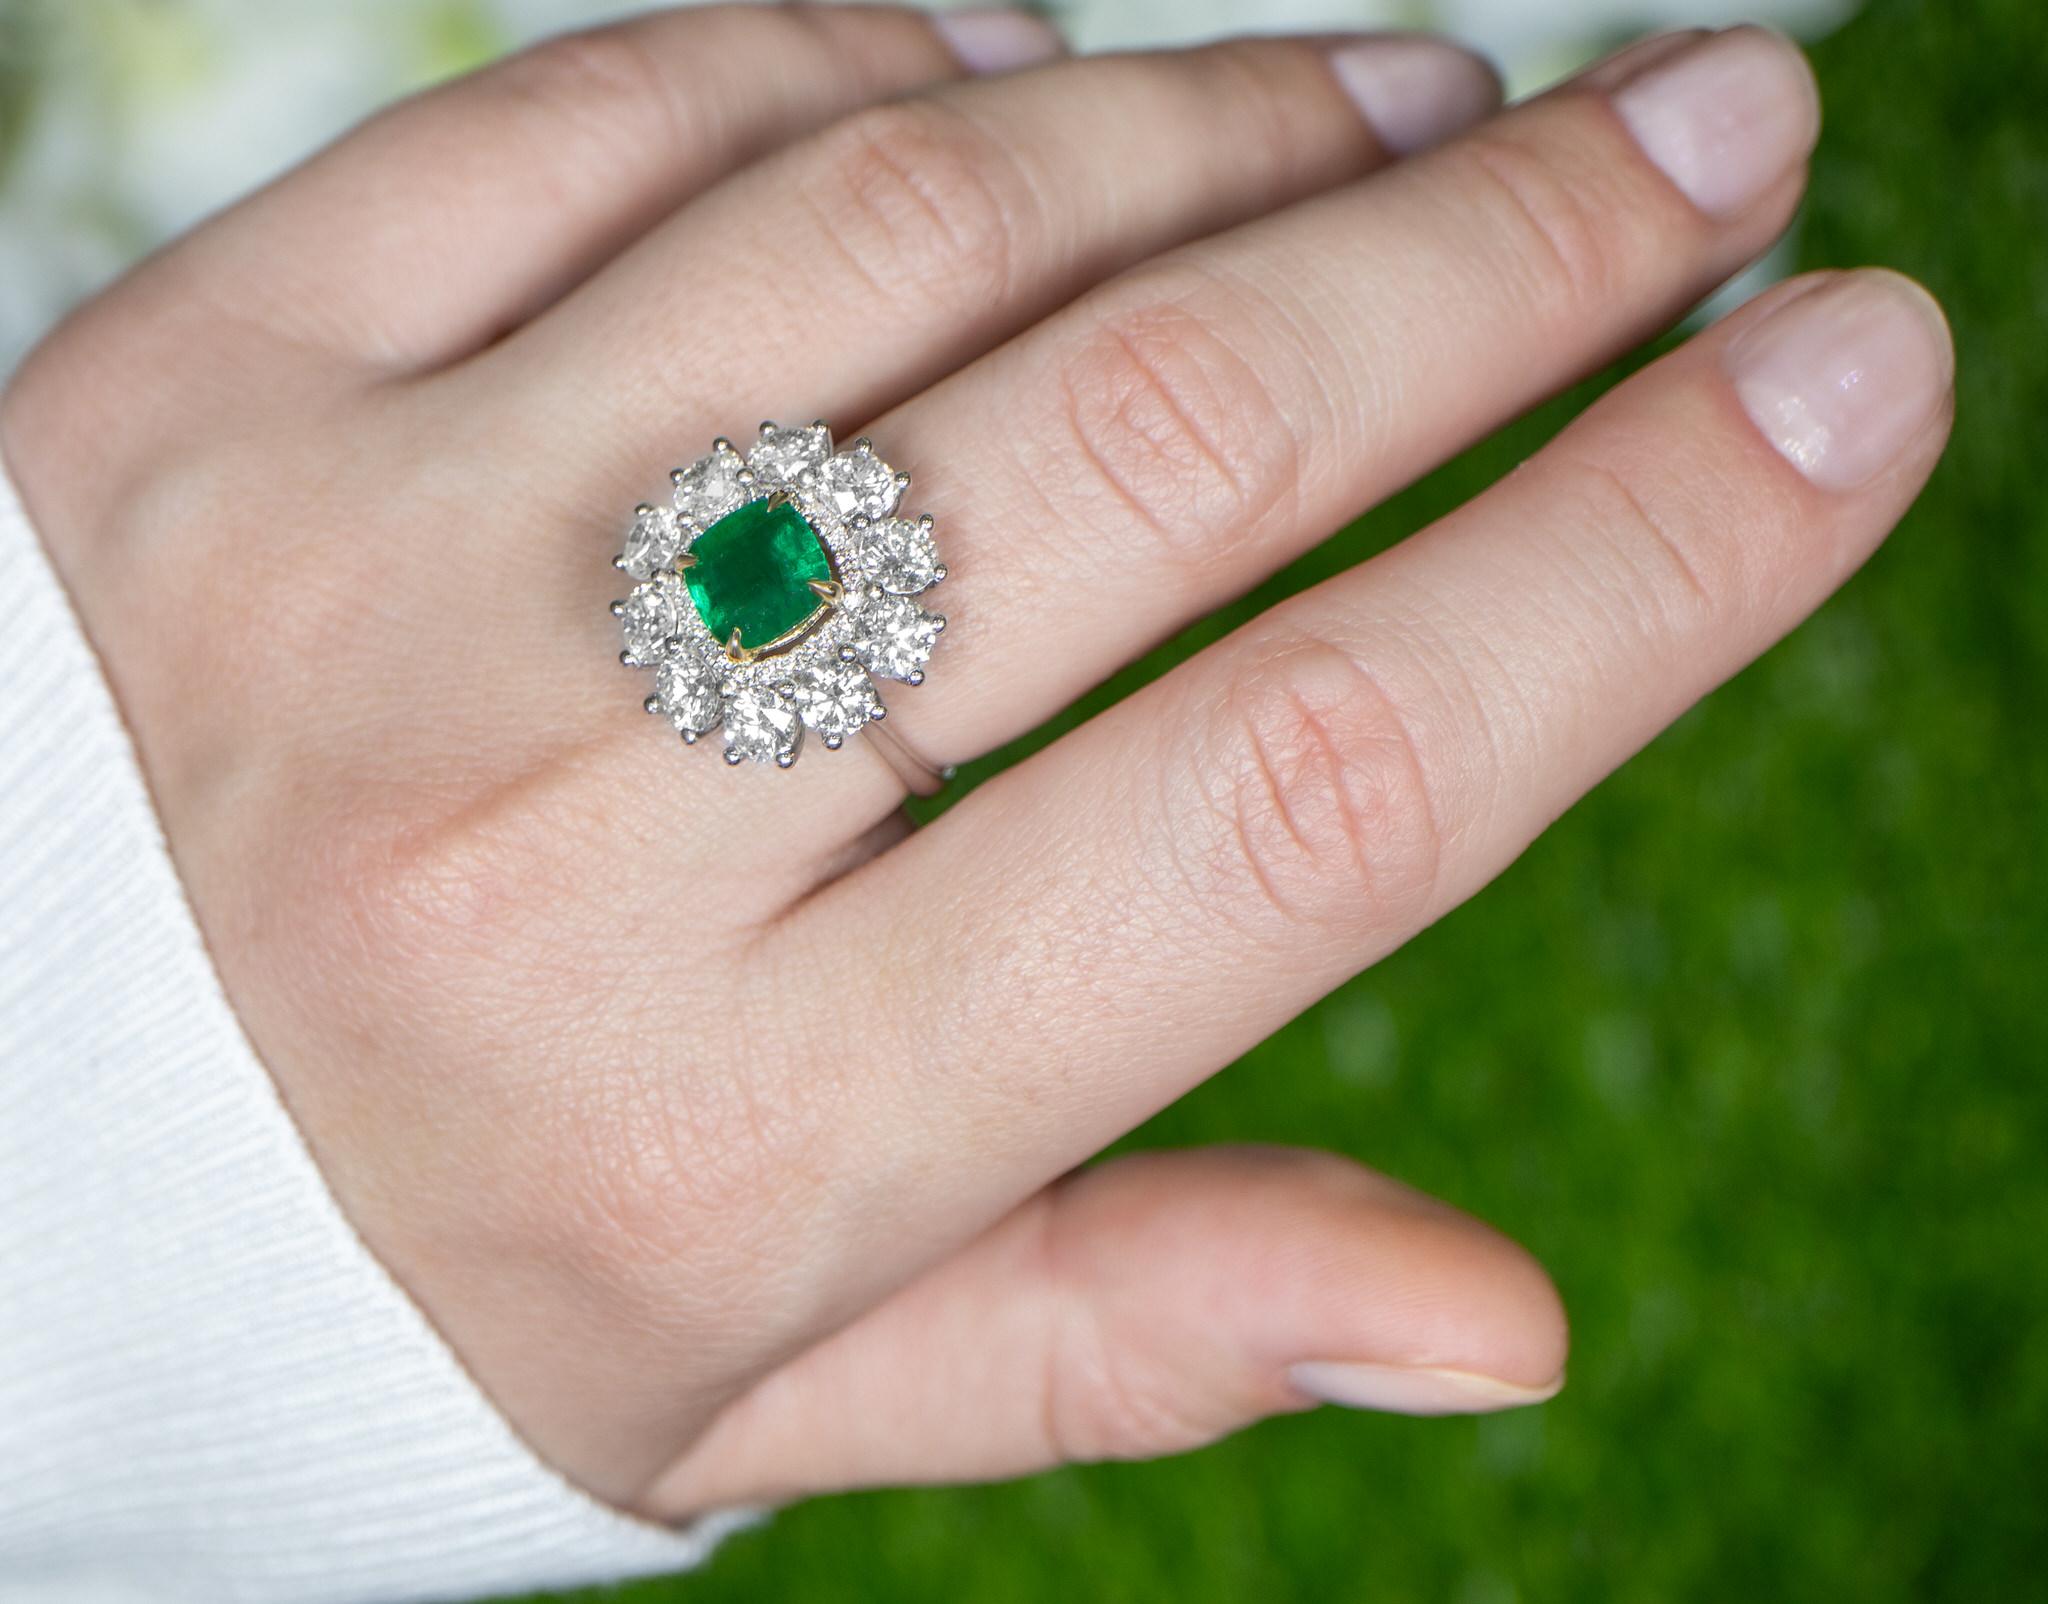 Art Deco Important Emerald Ring With Large Diamond Halo Setting 5.44 Carats 18K Gold For Sale